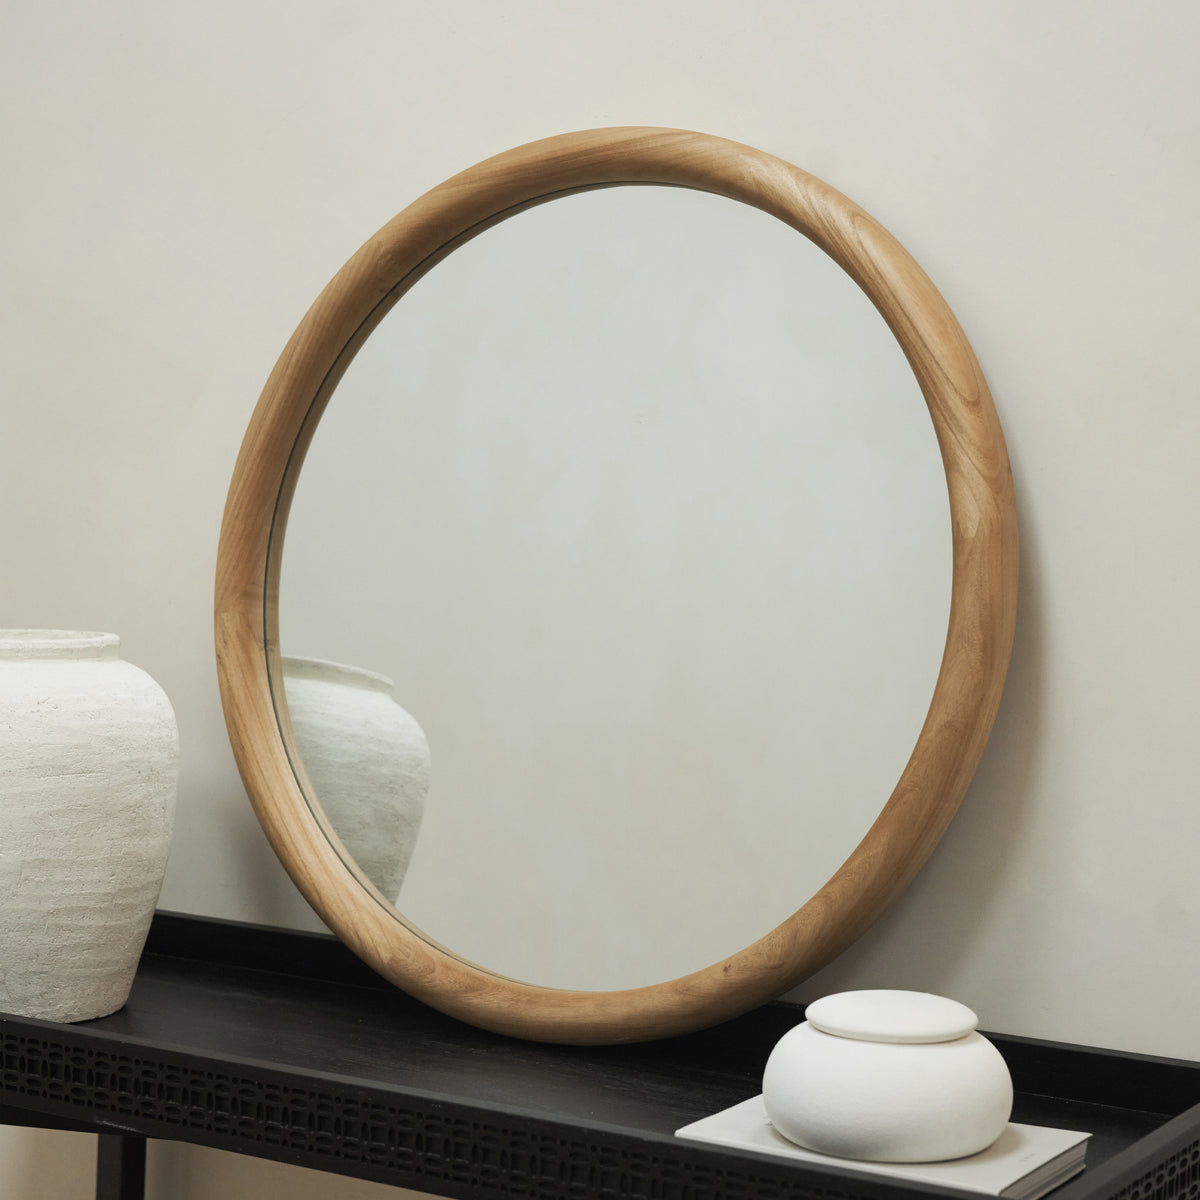 Our Natural Round Wall Mirror leaning against a wall